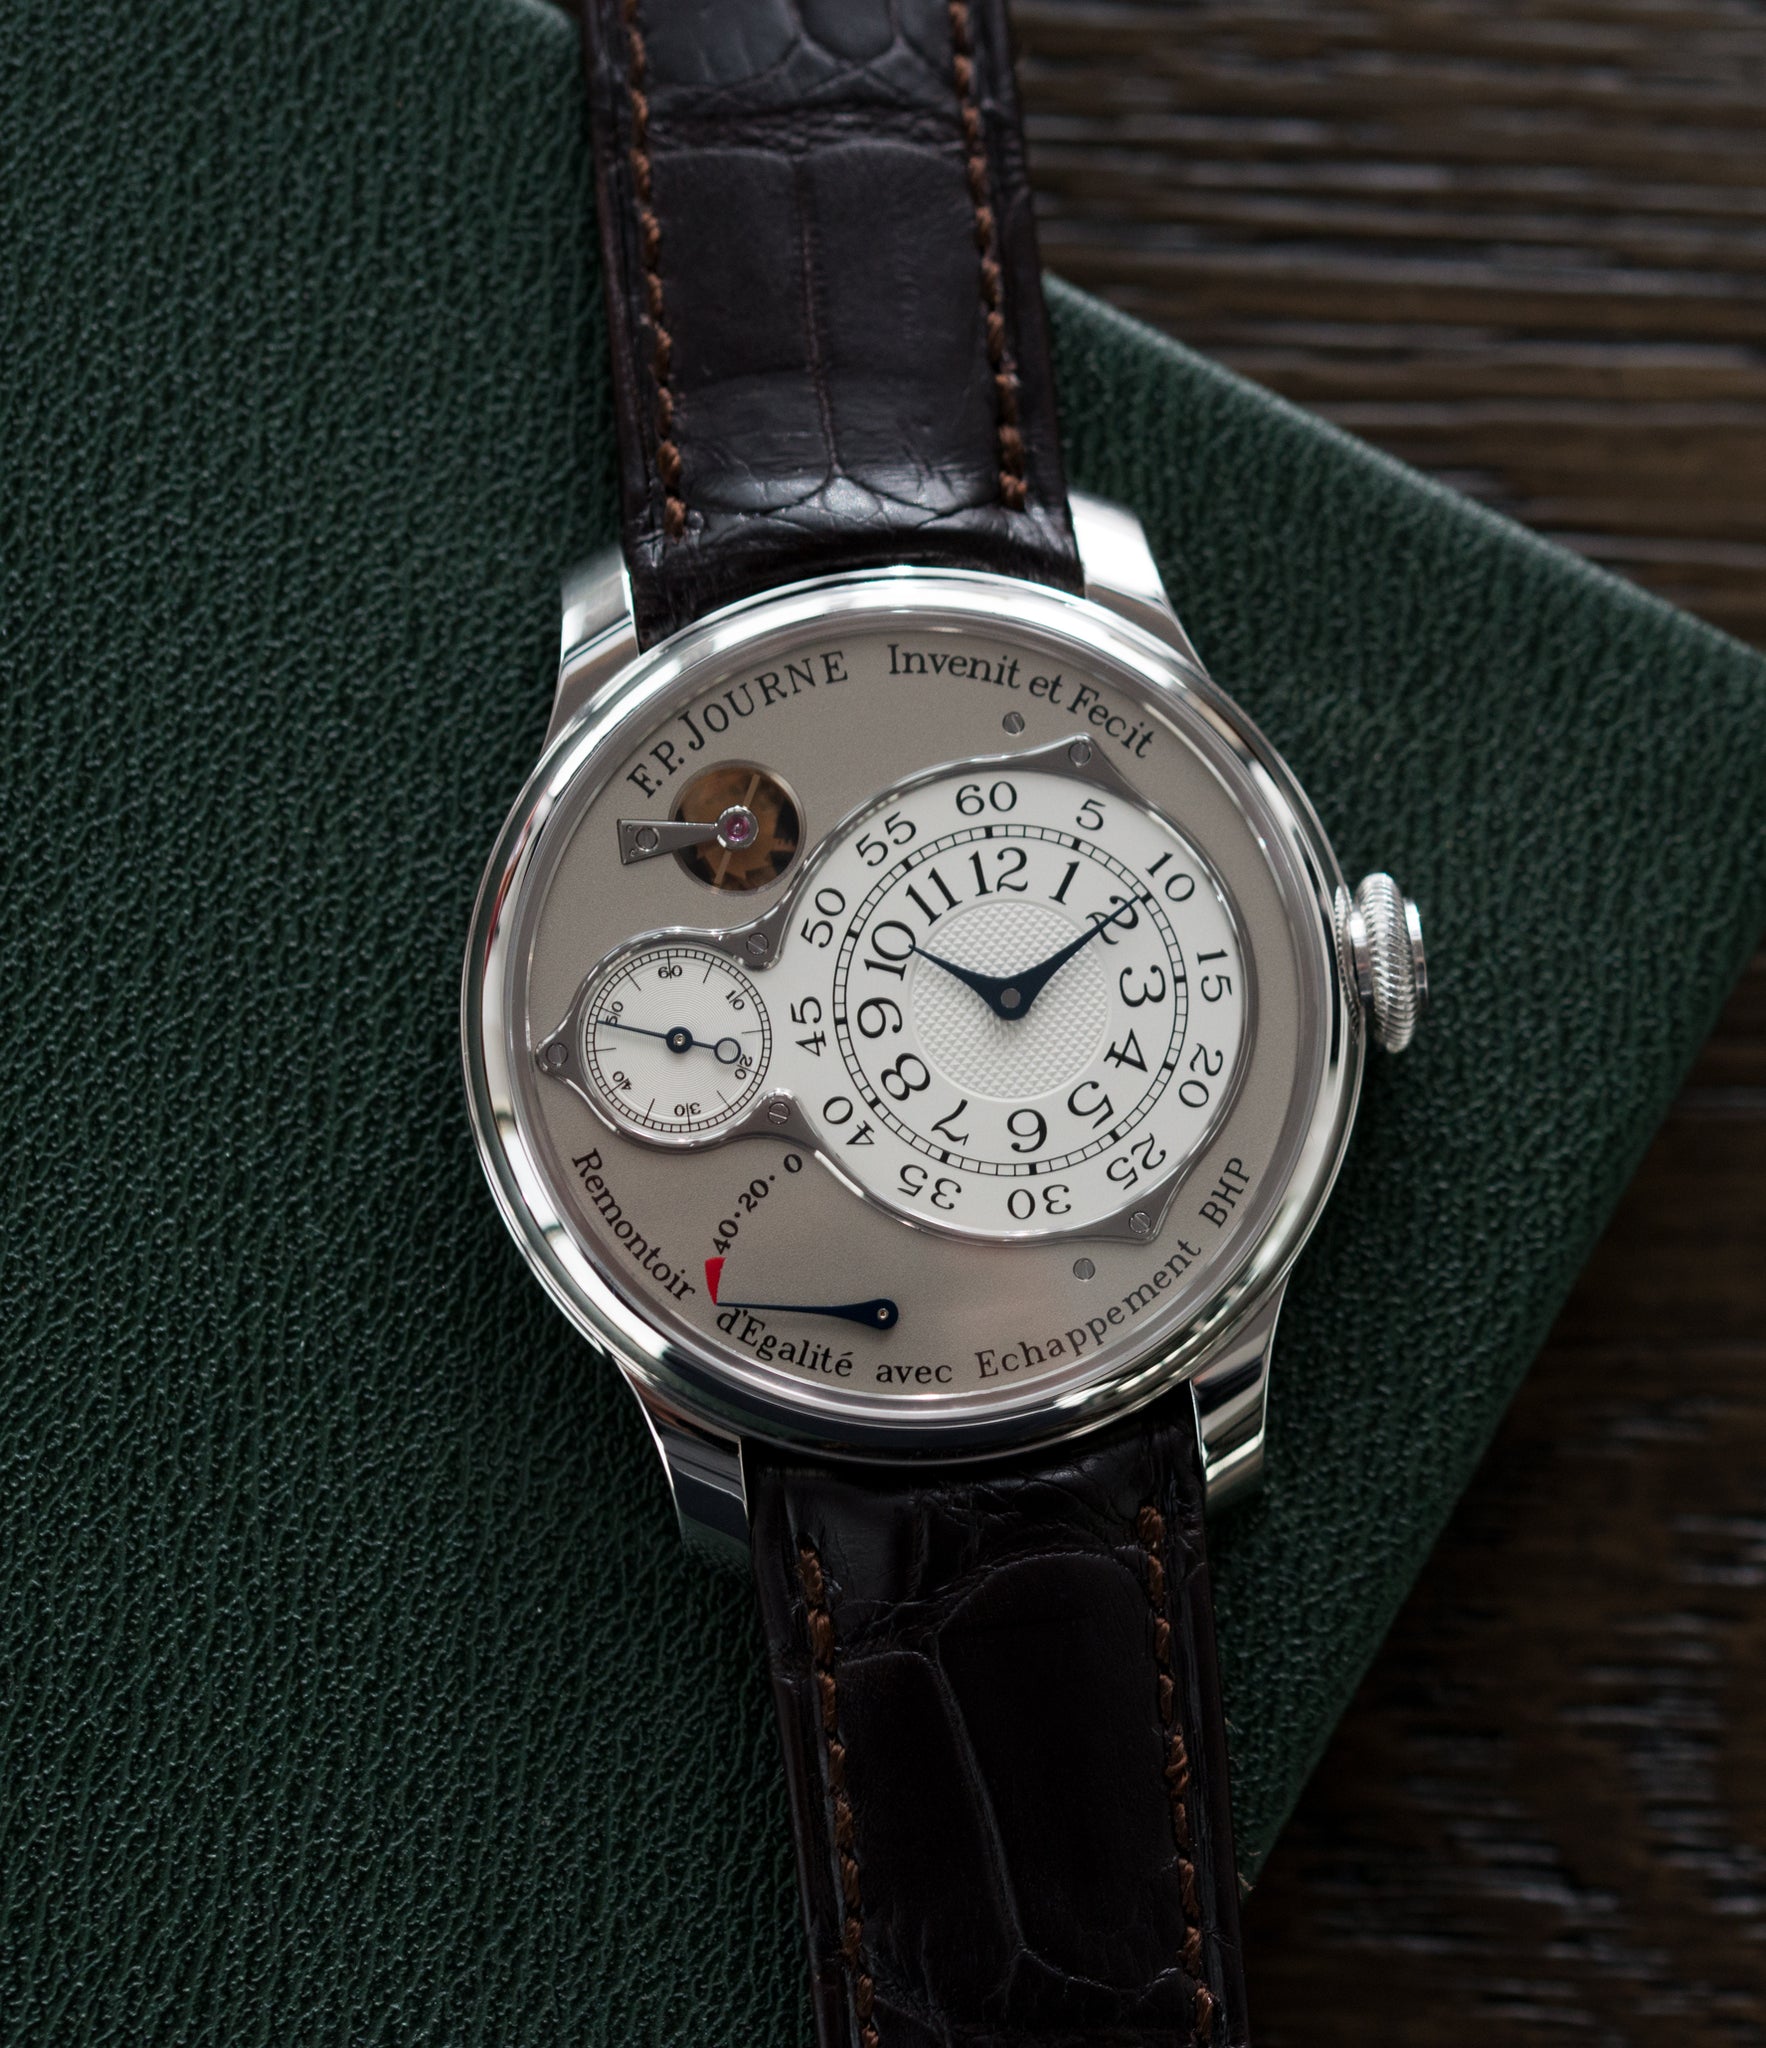 shop F. P. Journe Chronometre Optimum platinum rare watch for sale online at A Collected Man London approved retailer of independent watchmakers